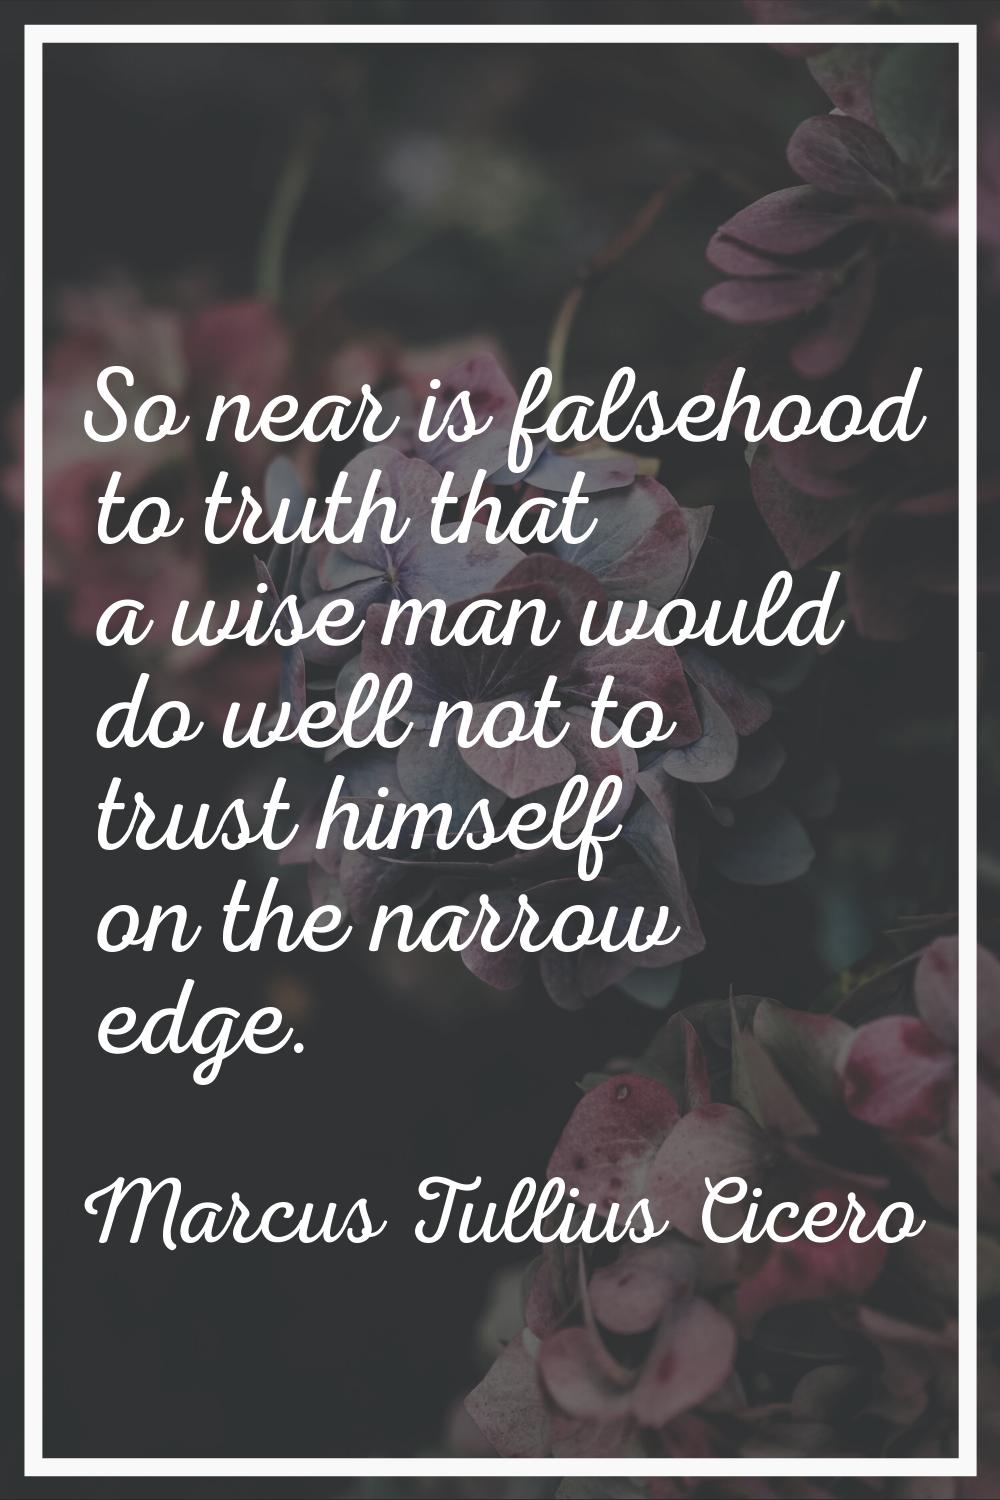 So near is falsehood to truth that a wise man would do well not to trust himself on the narrow edge